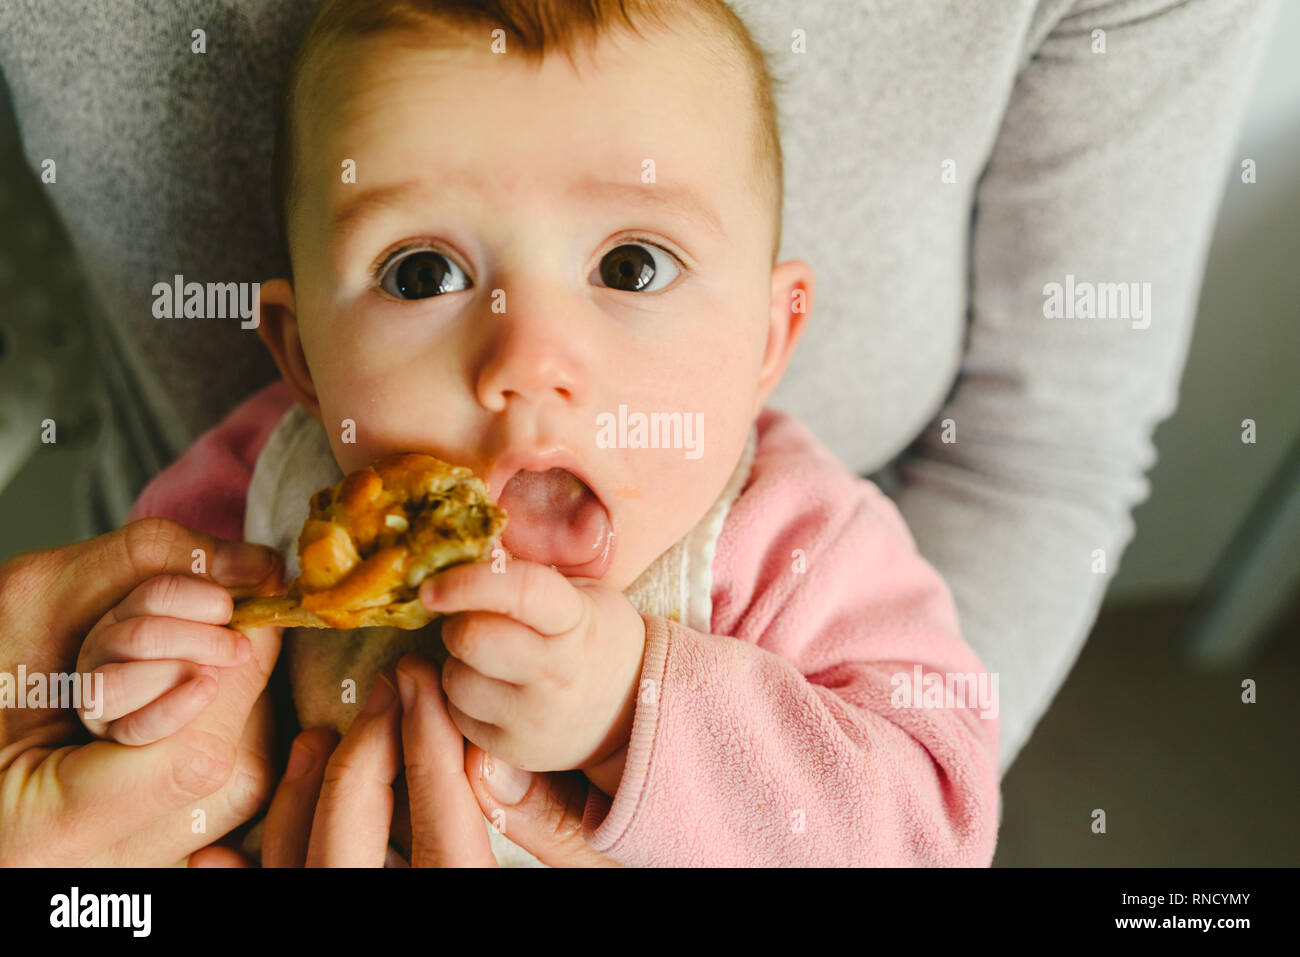 5 month old baby eating a chicken leg using the Baby led weaning BLW method  Stock Photo - Alamy